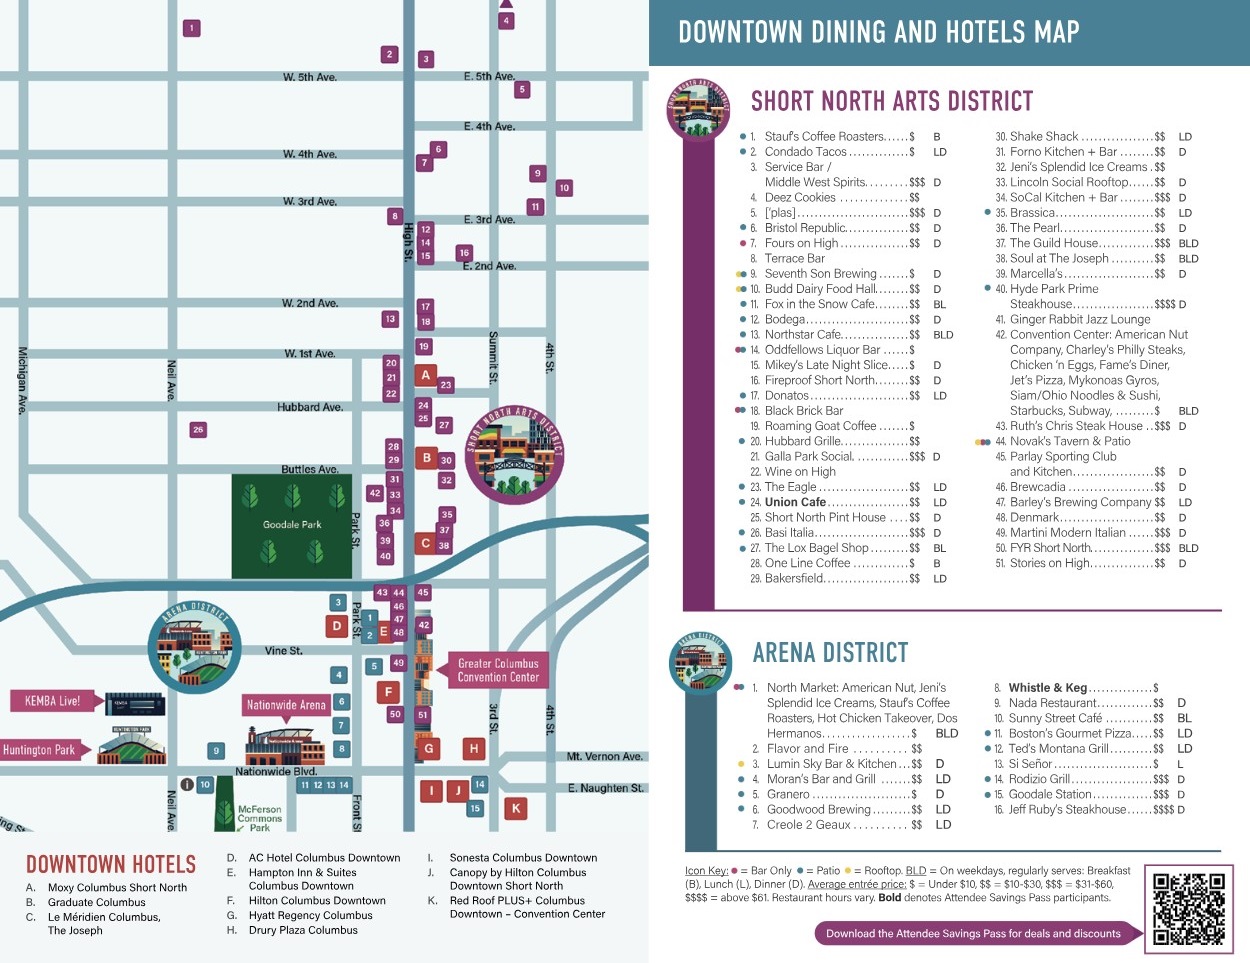 Hotel and Dining Map for the City of Columbus